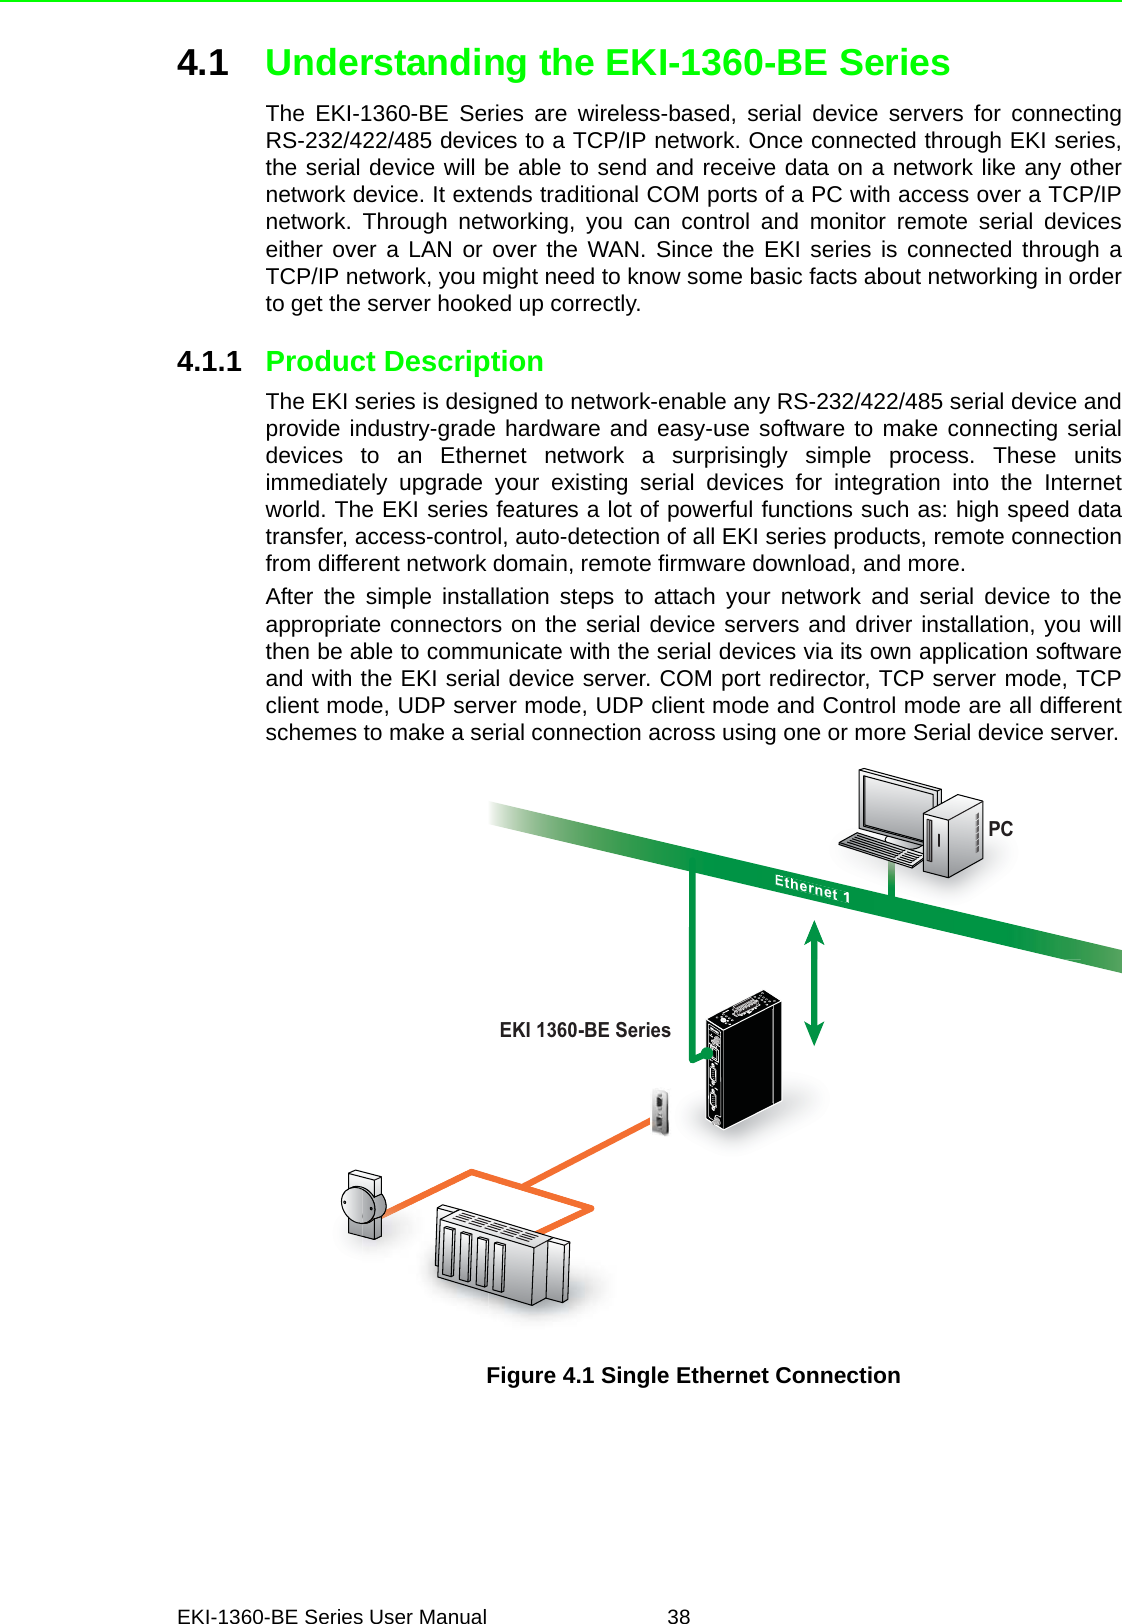 EKI-1360-BE Series User Manual 384.1 Understanding the EKI-1360-BE SeriesThe EKI-1360-BE Series are wireless-based, serial device servers for connectingRS-232/422/485 devices to a TCP/IP network. Once connected through EKI series,the serial device will be able to send and receive data on a network like any othernetwork device. It extends traditional COM ports of a PC with access over a TCP/IPnetwork. Through networking, you can control and monitor remote serial deviceseither over a LAN or over the WAN. Since the EKI series is connected through aTCP/IP network, you might need to know some basic facts about networking in orderto get the server hooked up correctly.4.1.1 Product DescriptionThe EKI series is designed to network-enable any RS-232/422/485 serial device andprovide industry-grade hardware and easy-use software to make connecting serialdevices to an Ethernet network a surprisingly simple process. These unitsimmediately upgrade your existing serial devices for integration into the Internetworld. The EKI series features a lot of powerful functions such as: high speed datatransfer, access-control, auto-detection of all EKI series products, remote connectionfrom different network domain, remote firmware download, and more.After the simple installation steps to attach your network and serial device to theappropriate connectors on the serial device servers and driver installation, you willthen be able to communicate with the serial devices via its own application softwareand with the EKI serial device server. COM port redirector, TCP server mode, TCPclient mode, UDP server mode, UDP client mode and Control mode are all differentschemes to make a serial connection across using one or more Serial device server.Figure 4.1 Single Ethernet ConnectionEKI 1360-BE SeriesResetWLANEthernet 1Ethernet 1PC